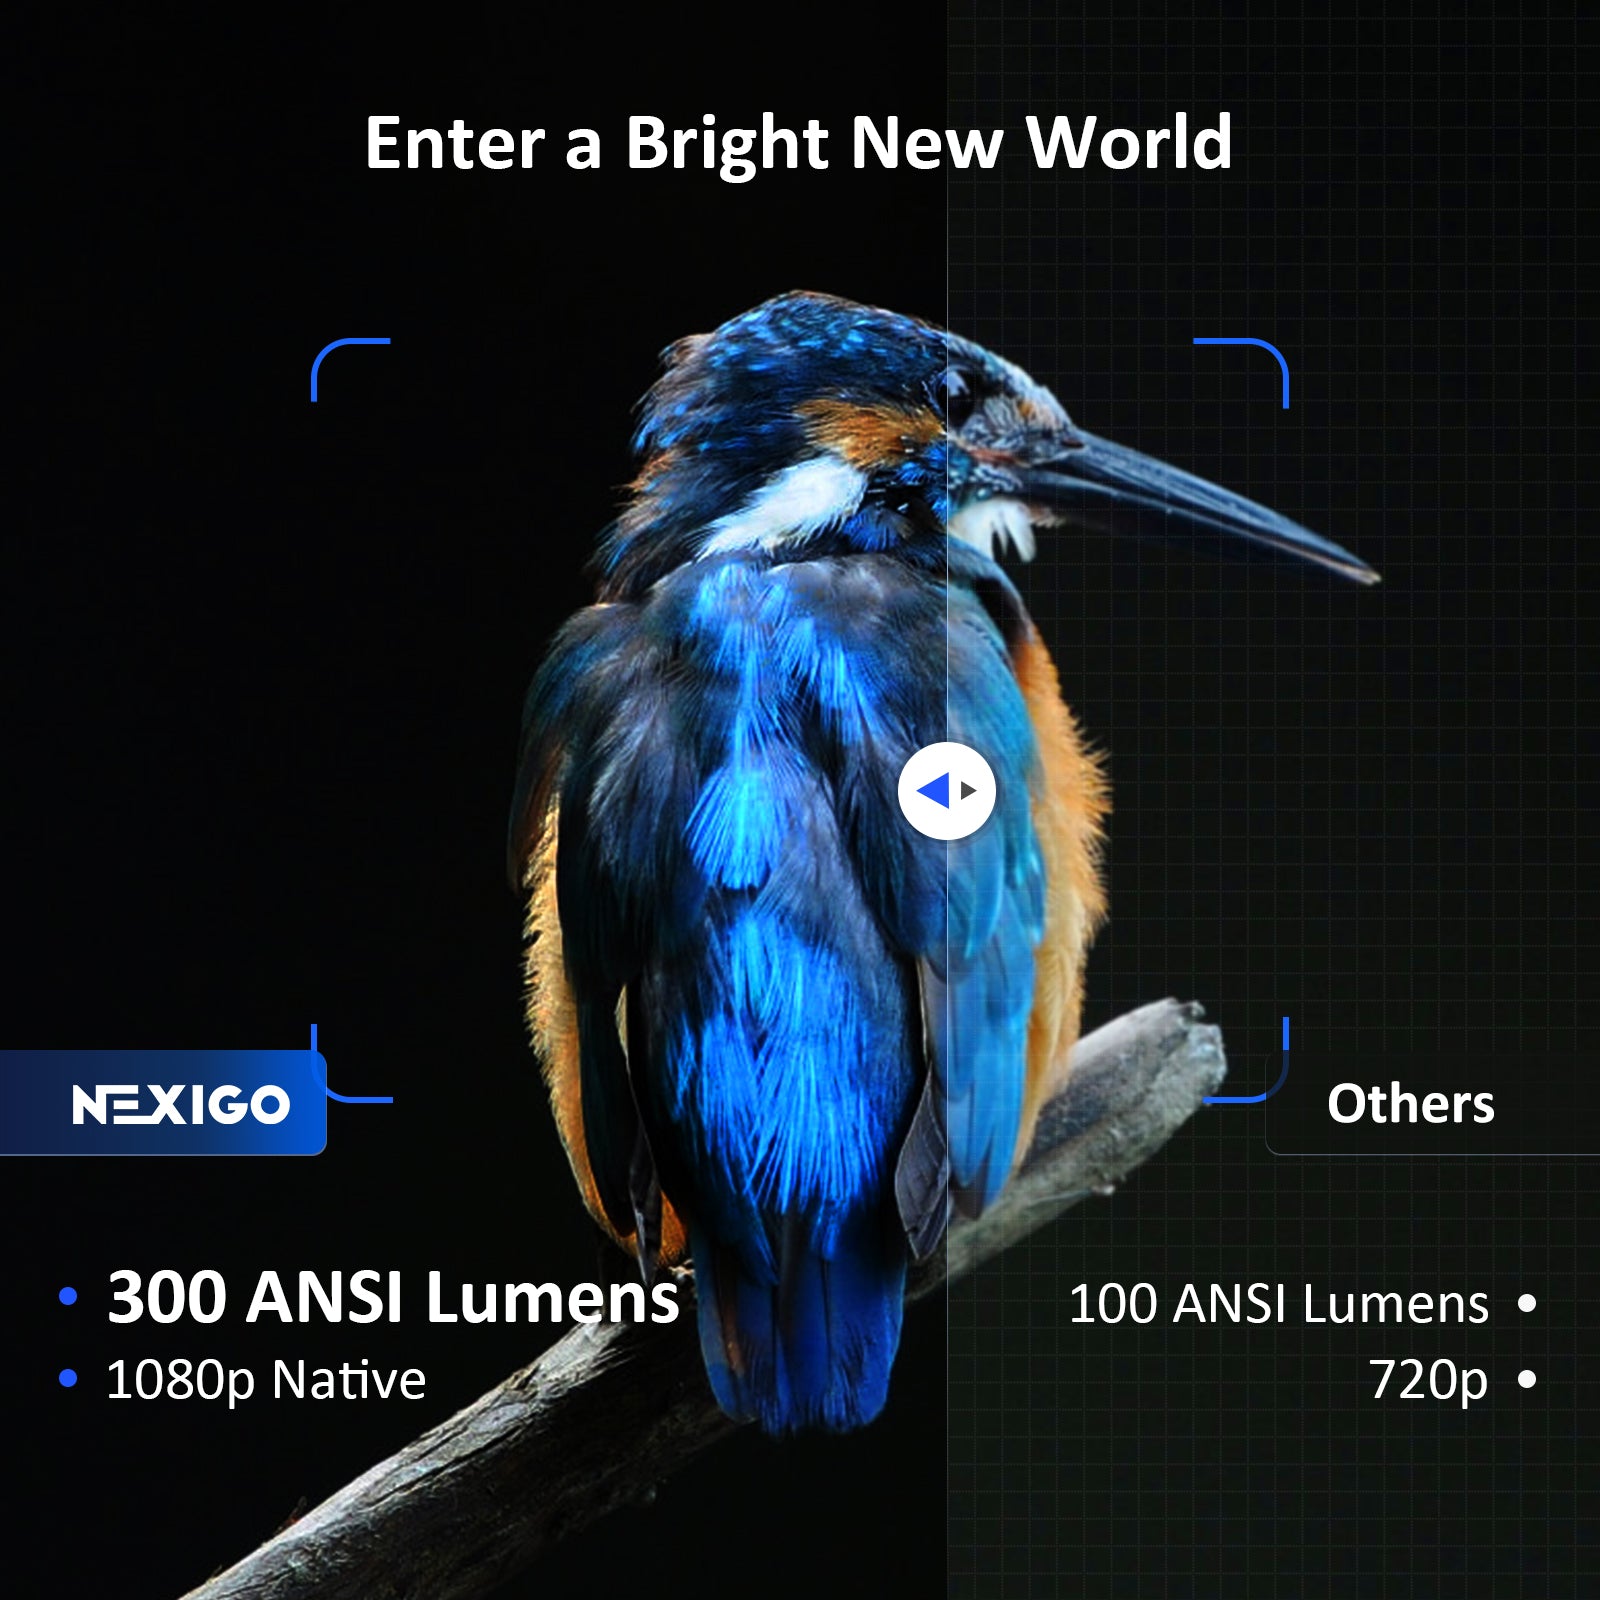 PJ10's 1080p resolution and 220 ANSI lumens provide a sharp image while others are blurry.